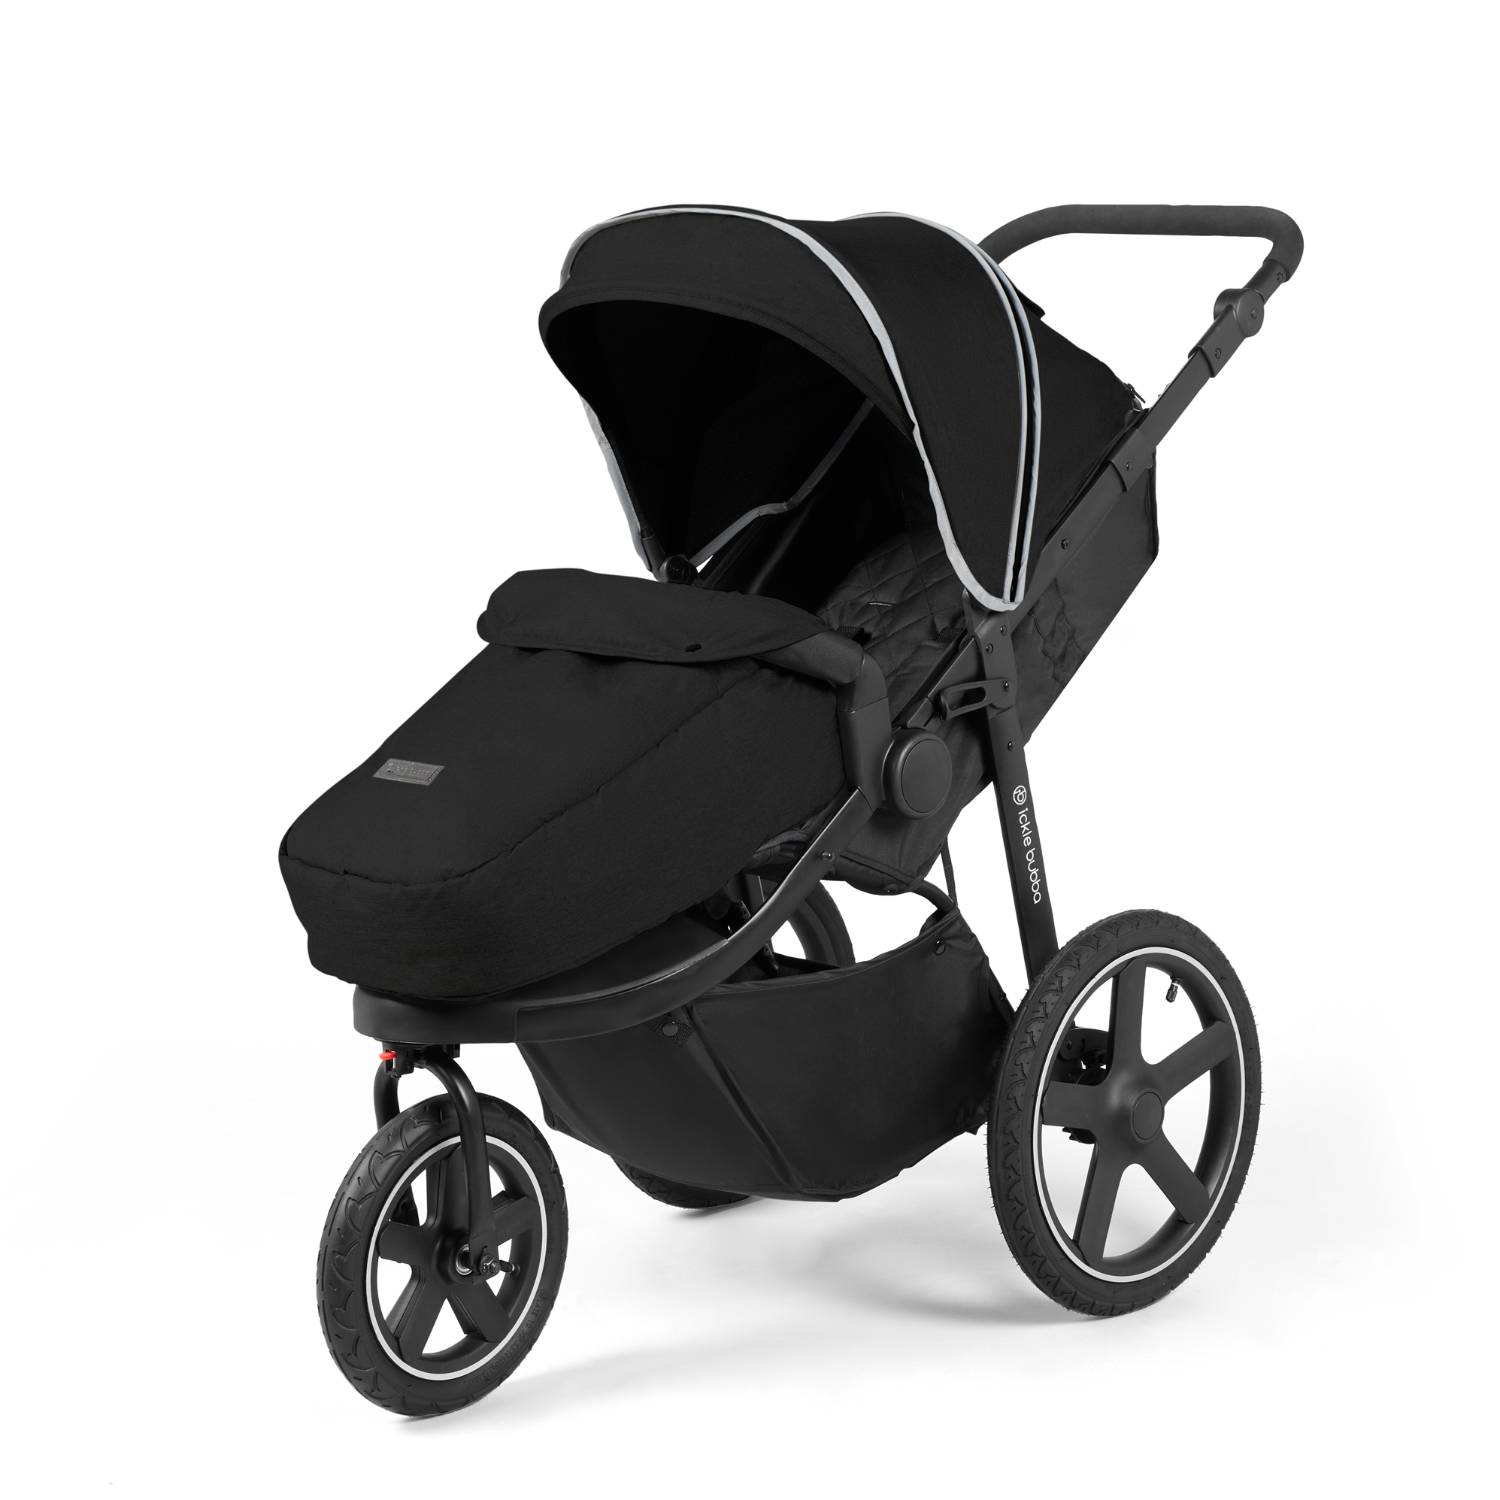 Ickle Bubba Venus Prime Jogger Stroller in Black colour with foot warmer